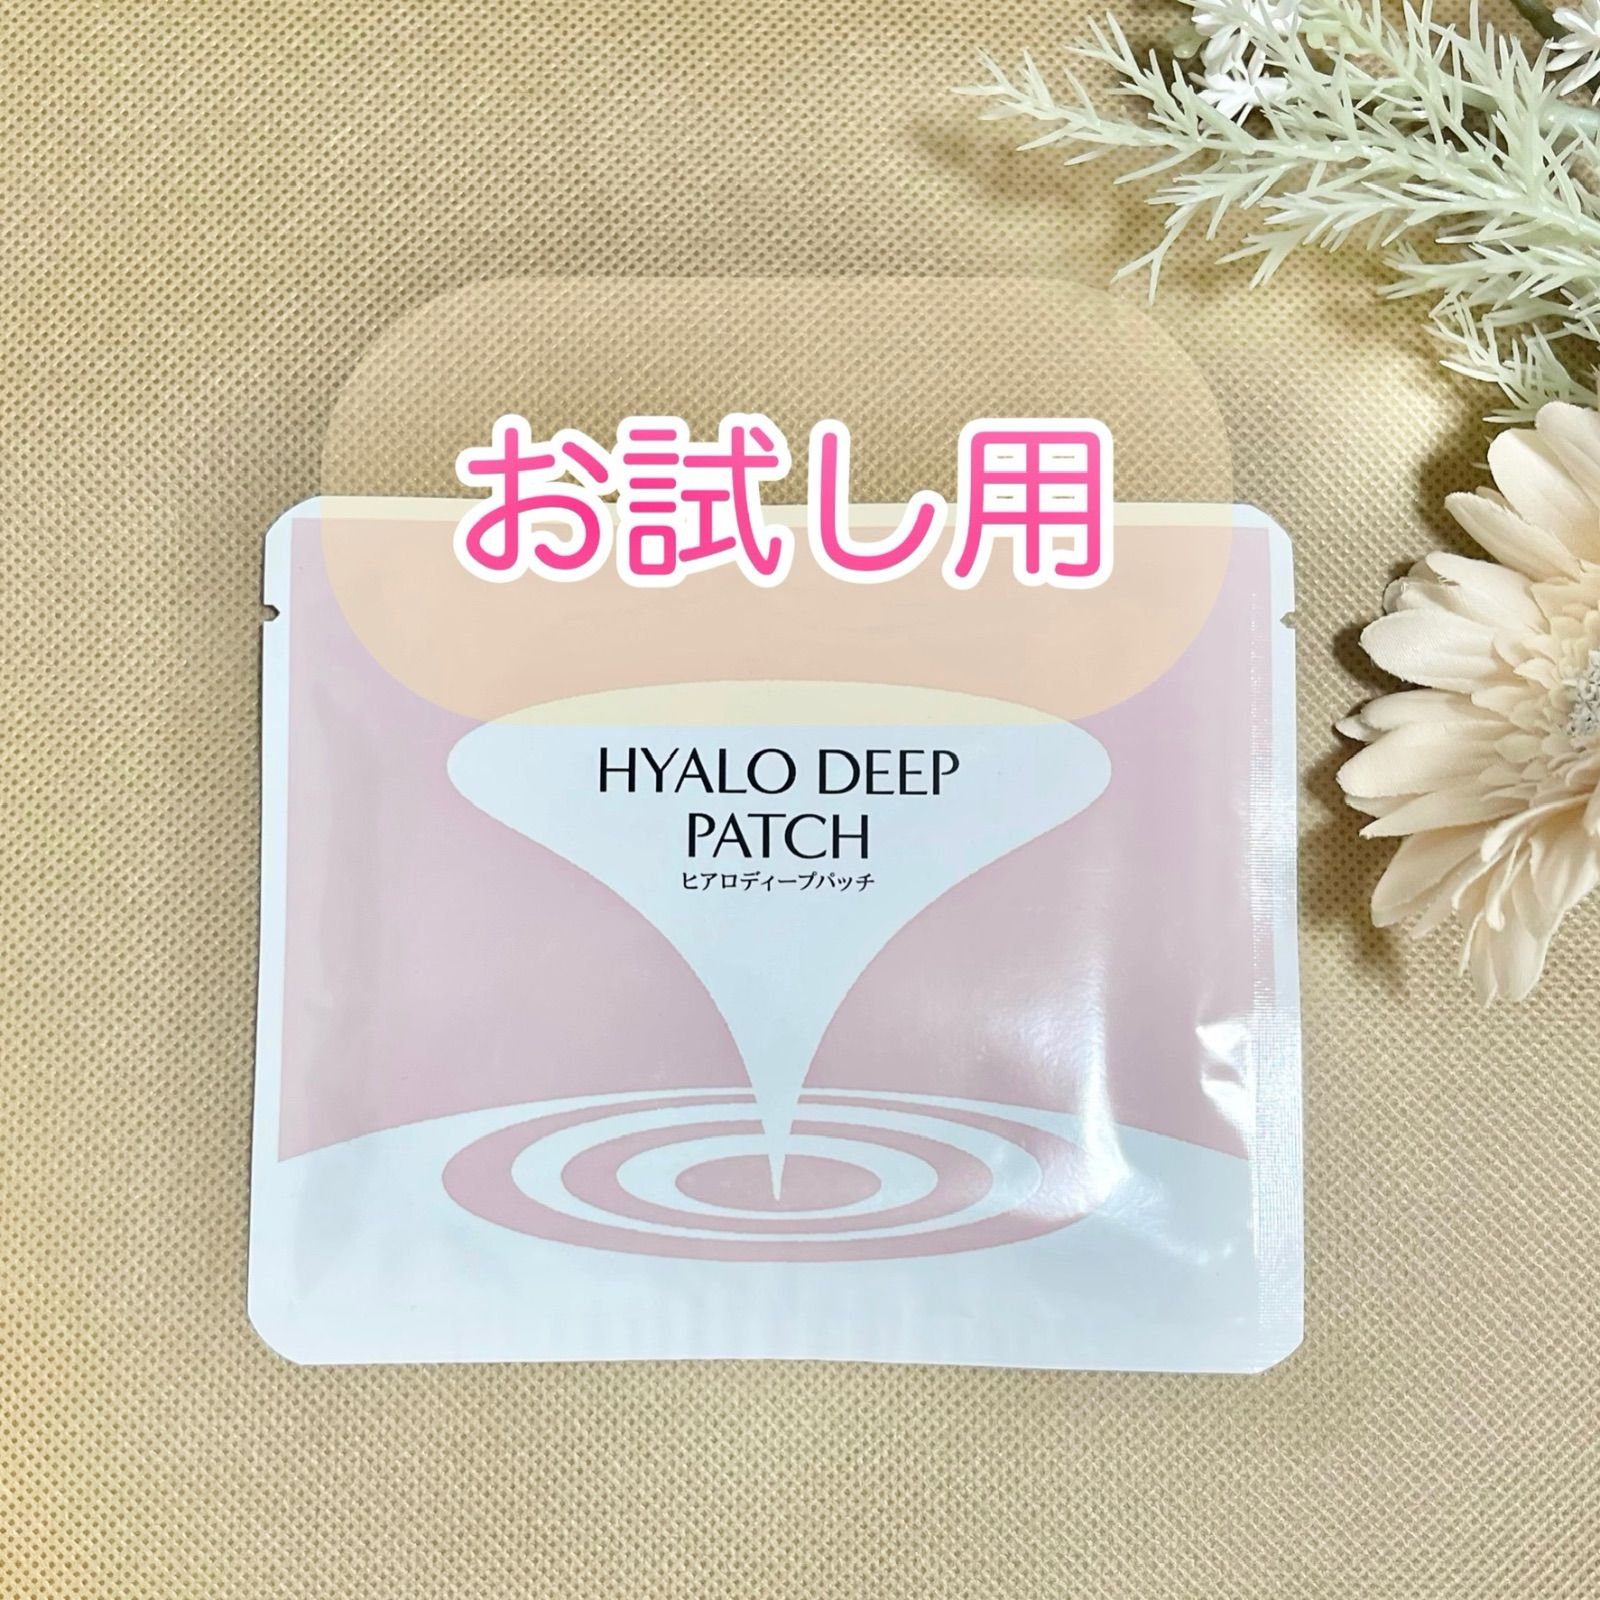 HYALO DEEP PATCH